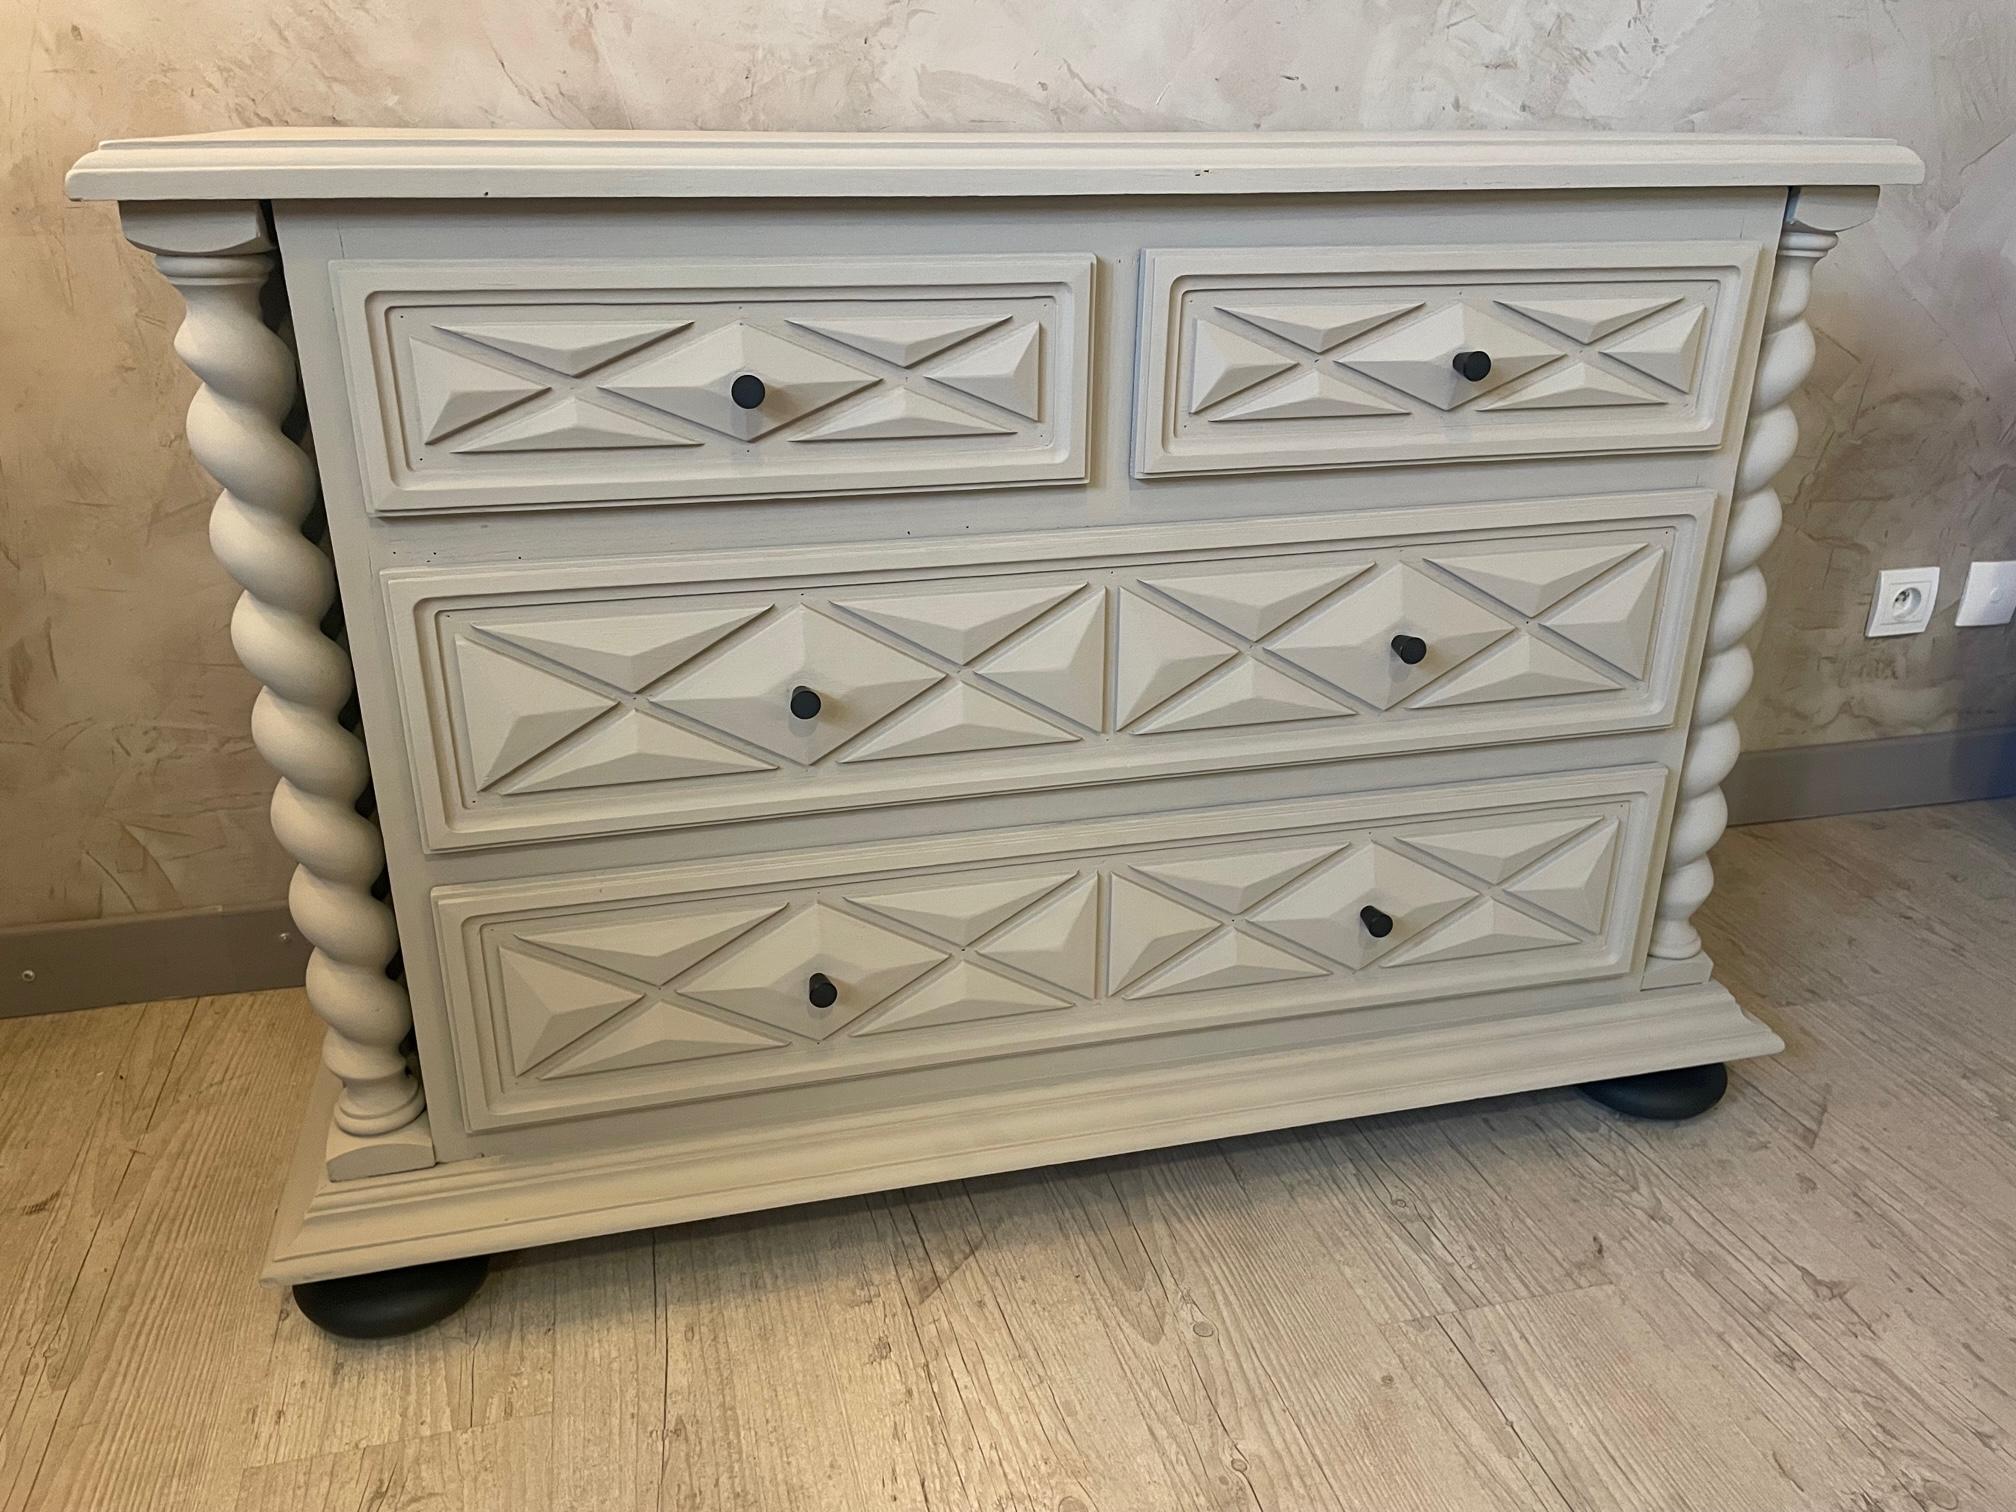 Beautiful 20th century French commode in the style of Louis XIII with two turned column and four drawers with diamond pattern. 
We wanted to give this chests of drawers a modern look in painting it and changing the handles with light metal handles.